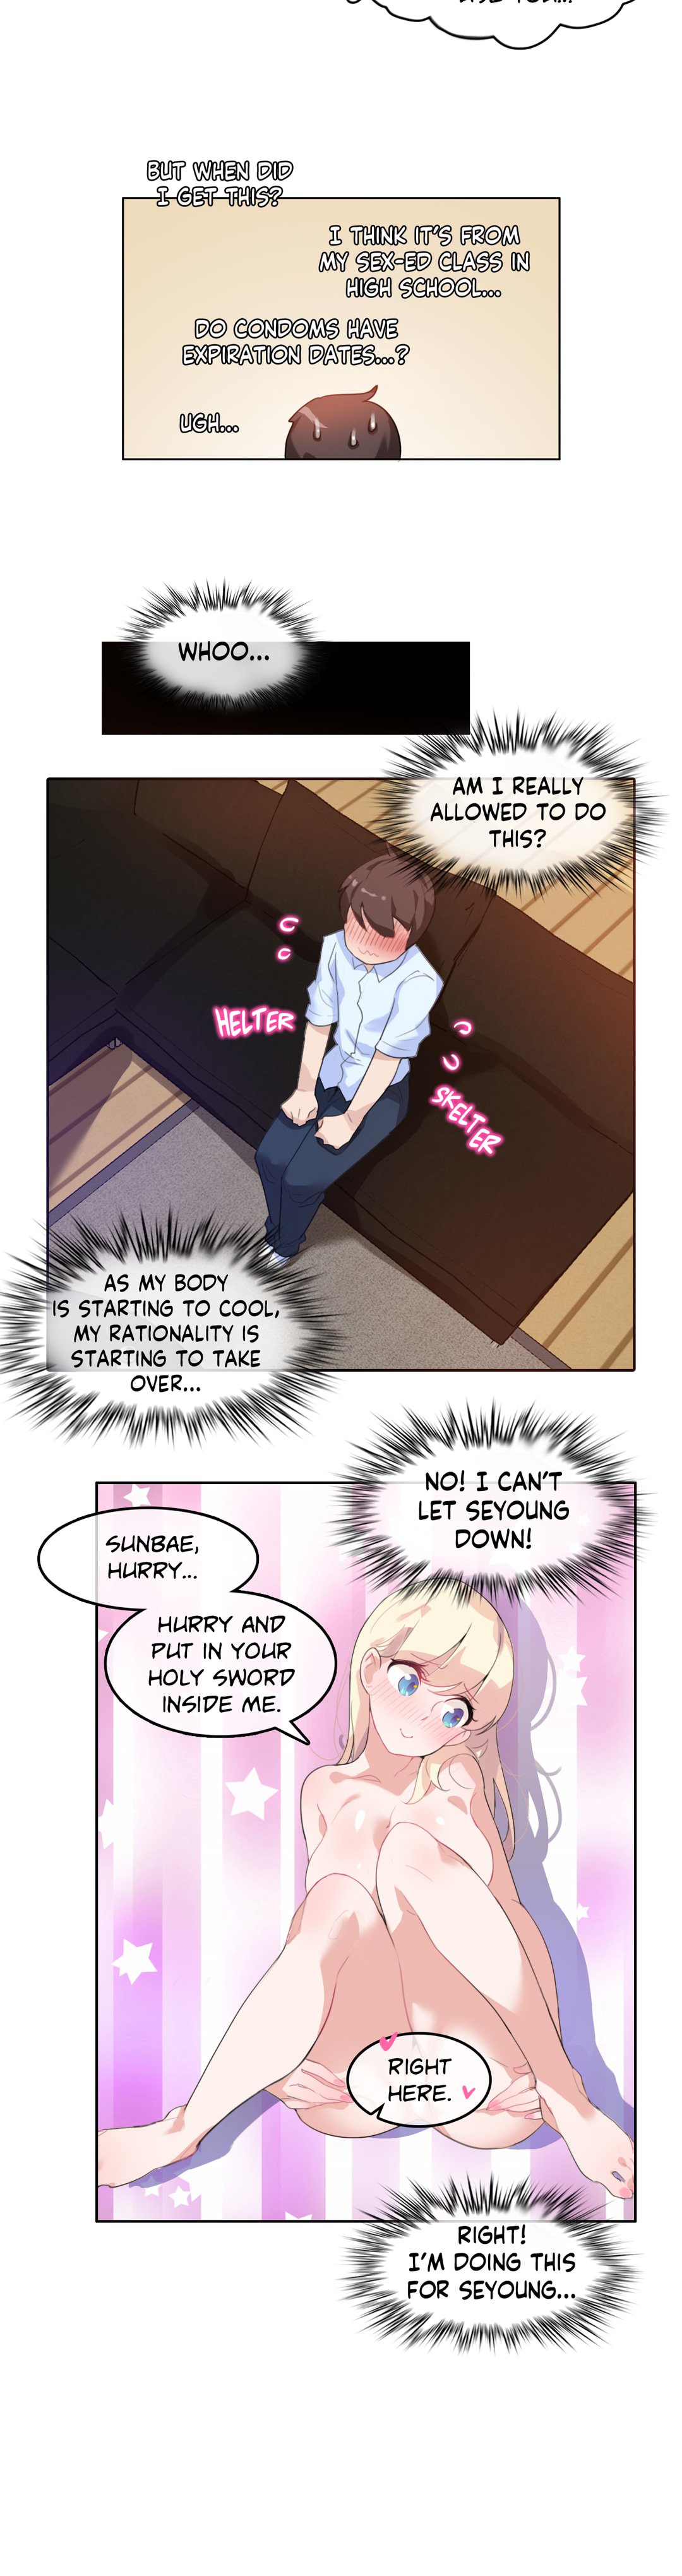 A Pervert's Daily Life - 11 page 11